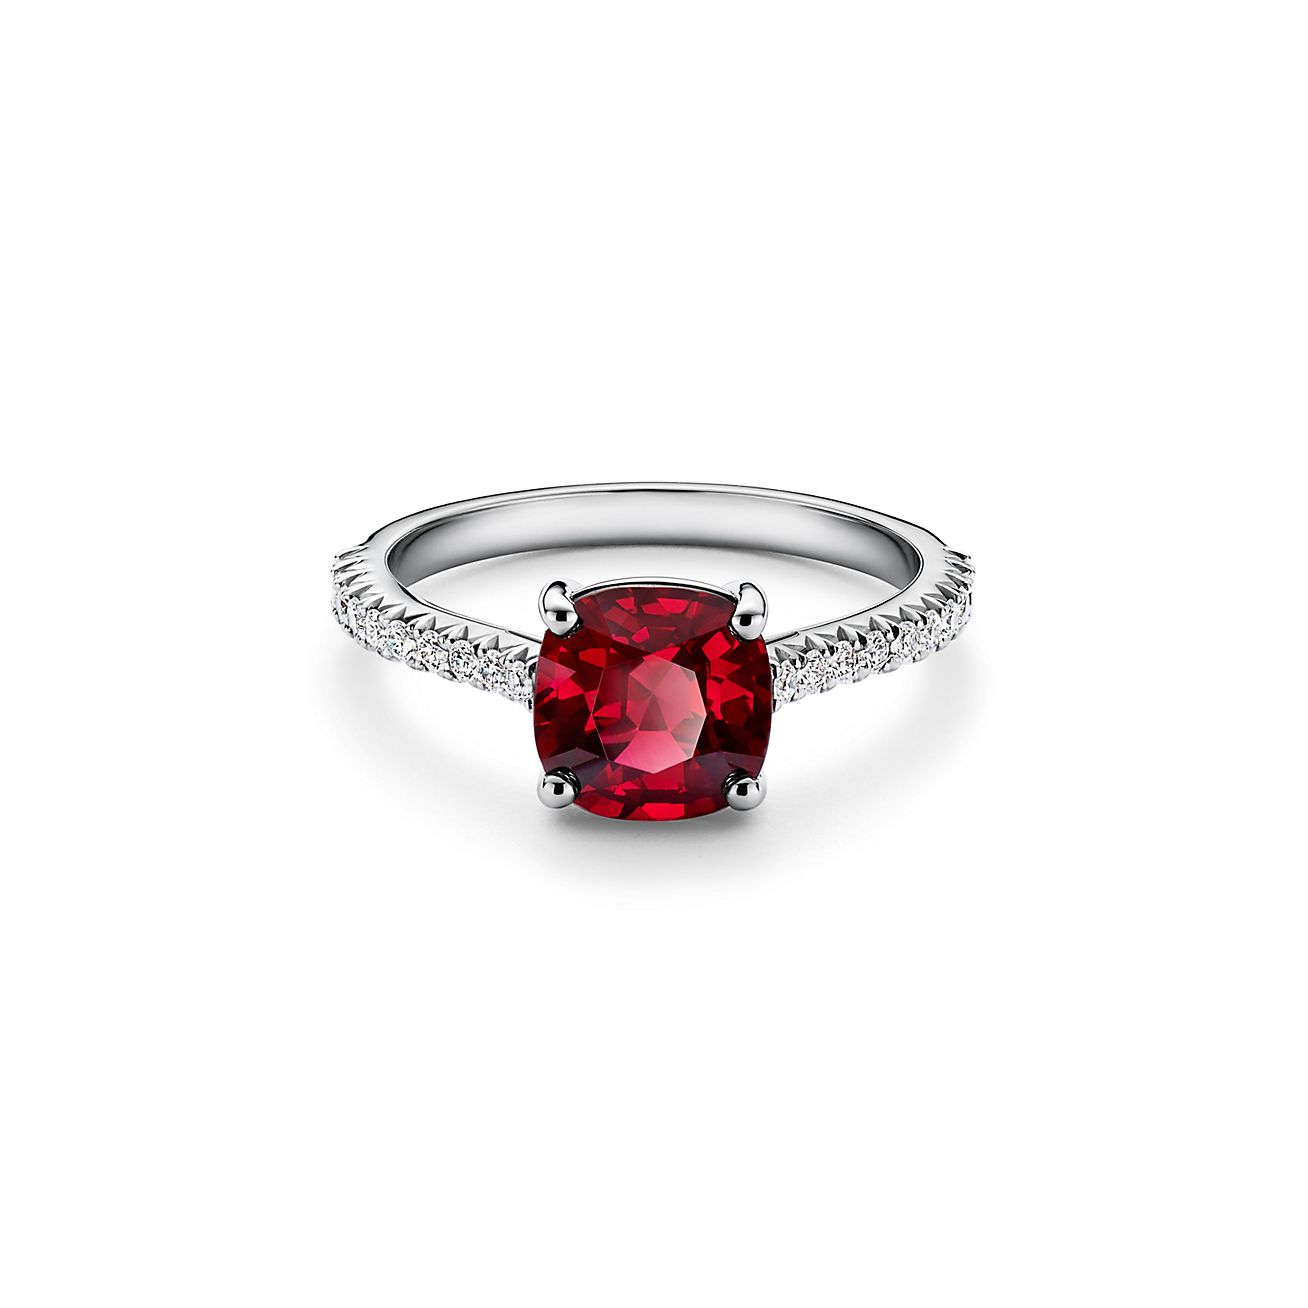 Details about   Victorian Slice Diamond Ruby Gems Dainty Stackable Ring Gift For Woman Jewelry